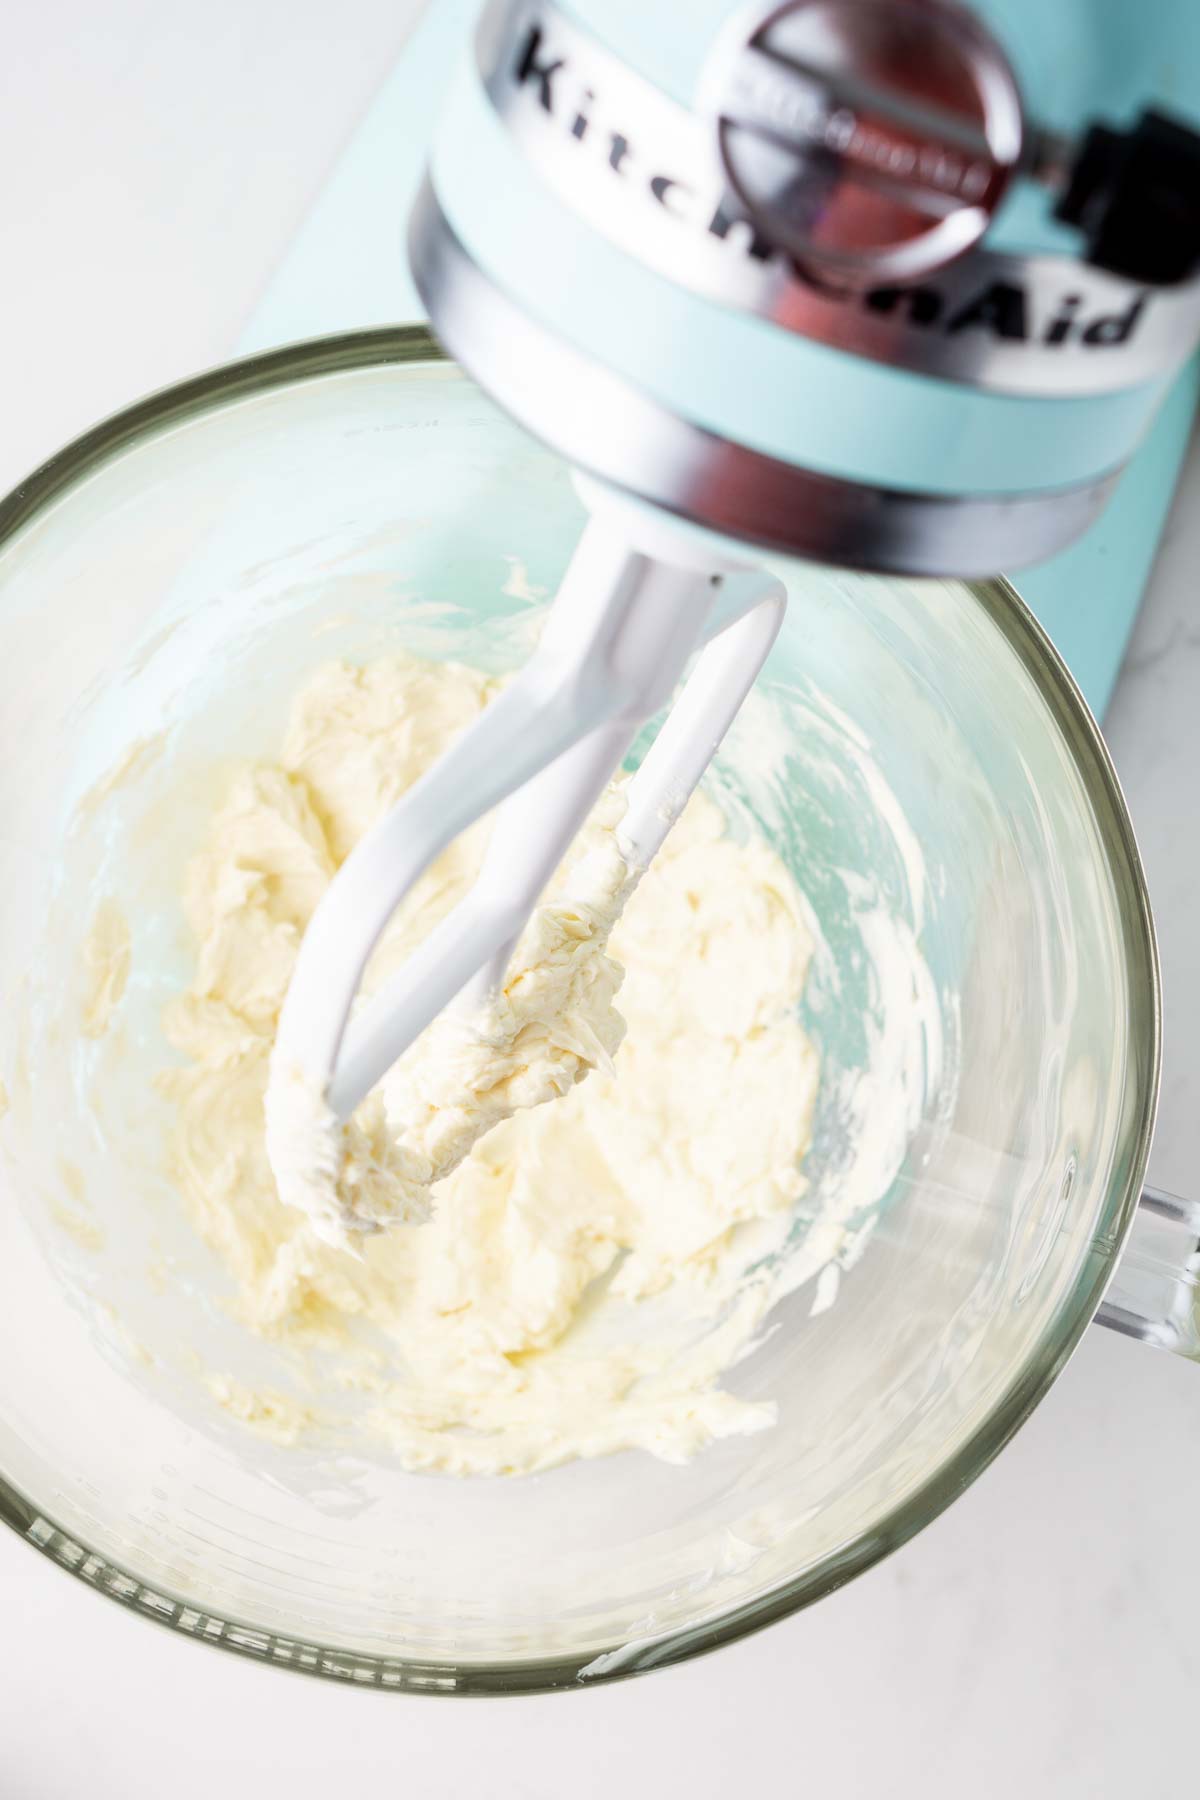 Butter and vanilla being beaten together in a stand mixer.